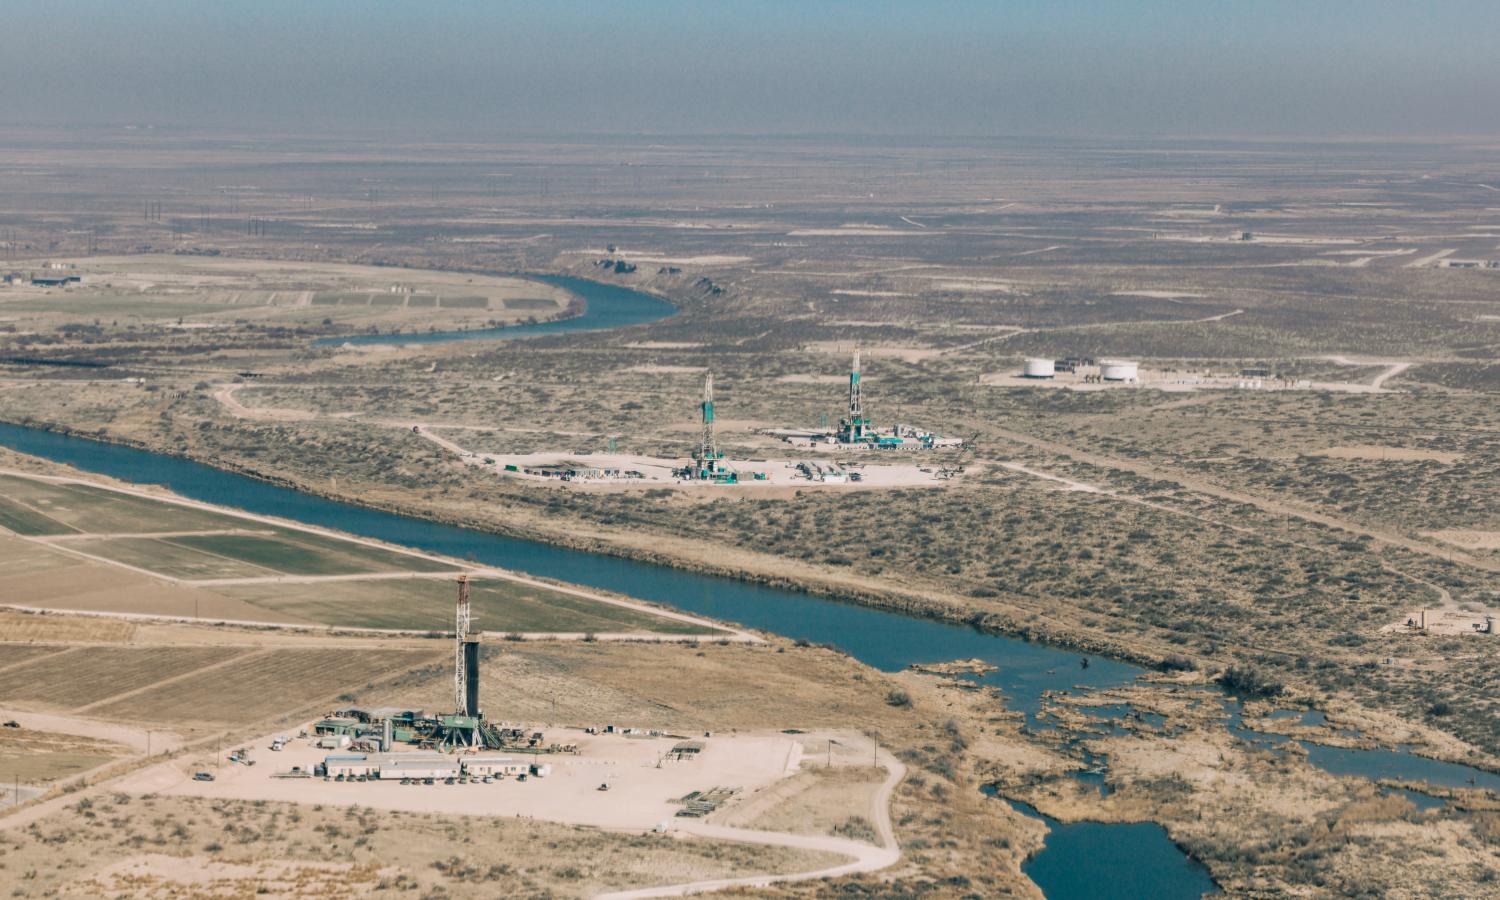 3 drilling rigs alongside the Pecos River outside of Carlsbad, NM